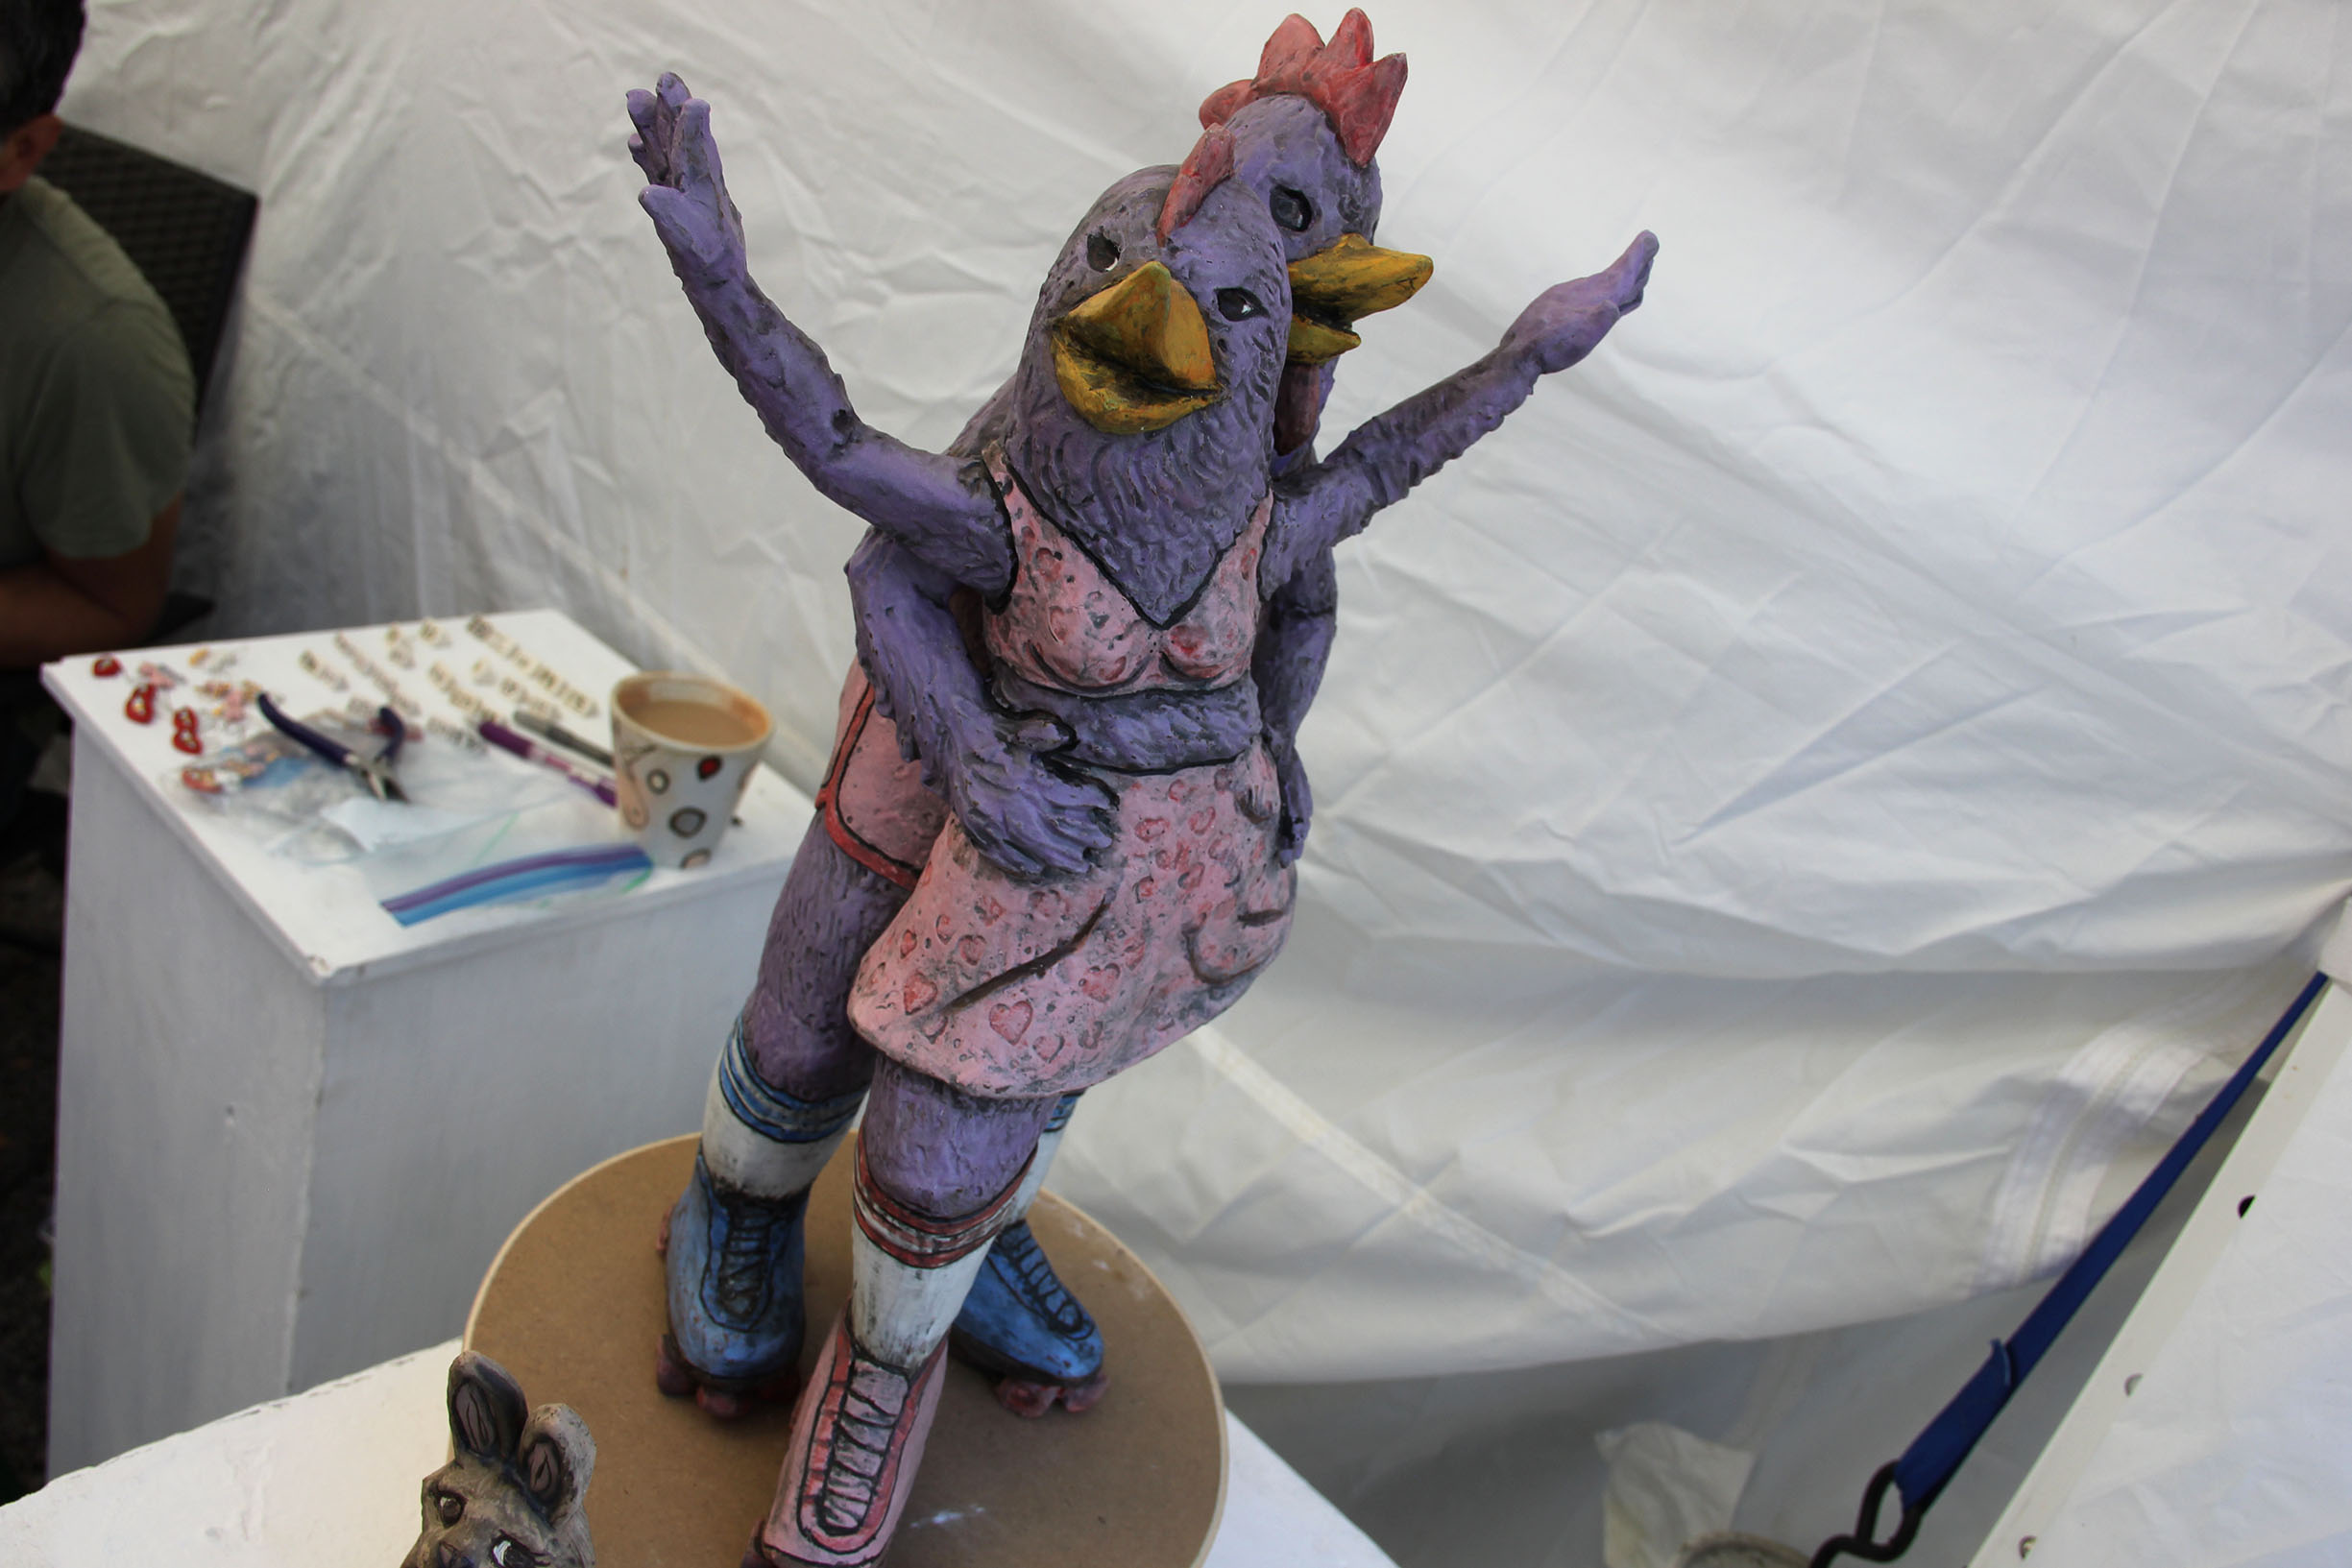 PHOTO: This 18-inch clay sculpture of purple roller skating chickens was created by artist Carol Schwartz. Traveling from right outside of San Marcos, Schwartz’s sculptural and functional ceramics focuses on storytelling. Photo by The Signal Online Editor Alyssa Shotwell.